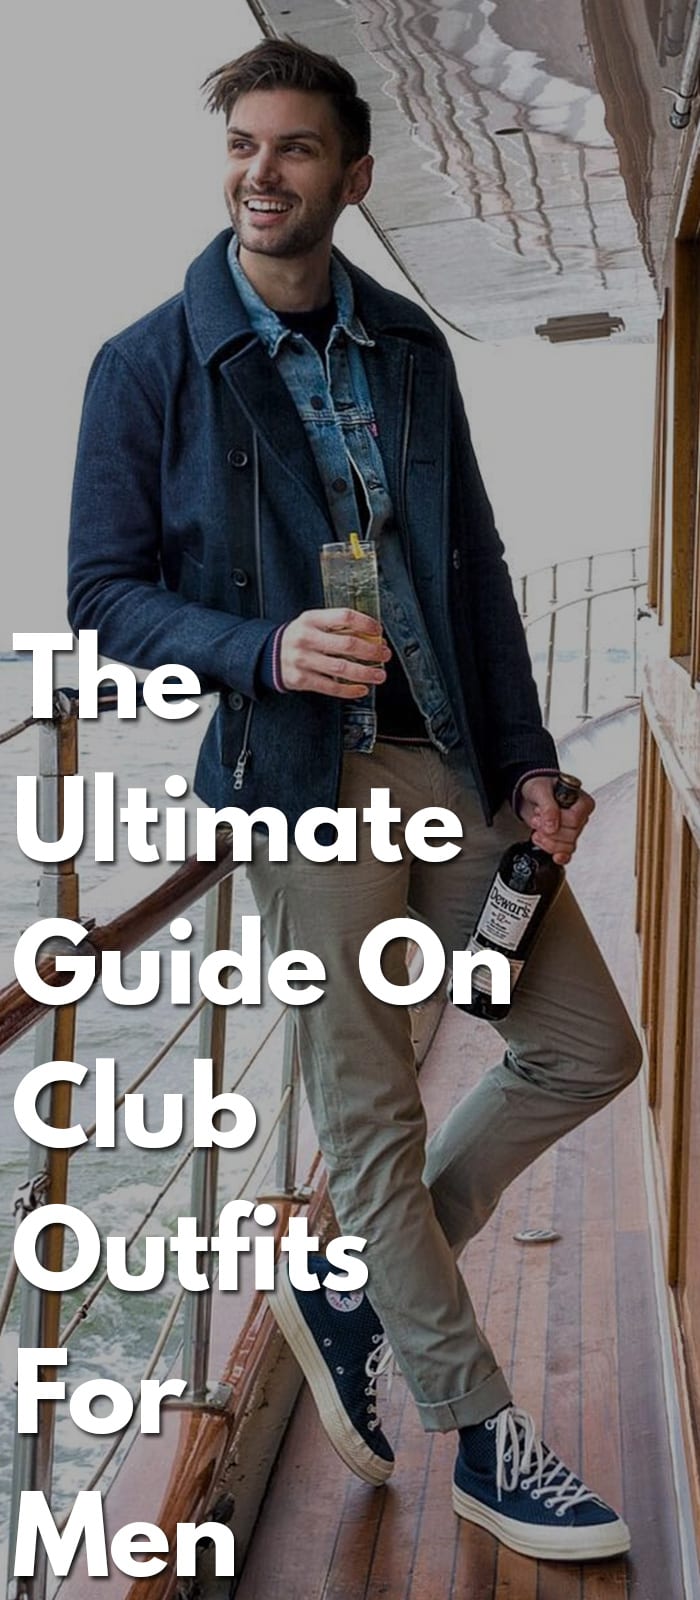 The-Ultimate-Guide-On-Club-Outfits-For-Men..